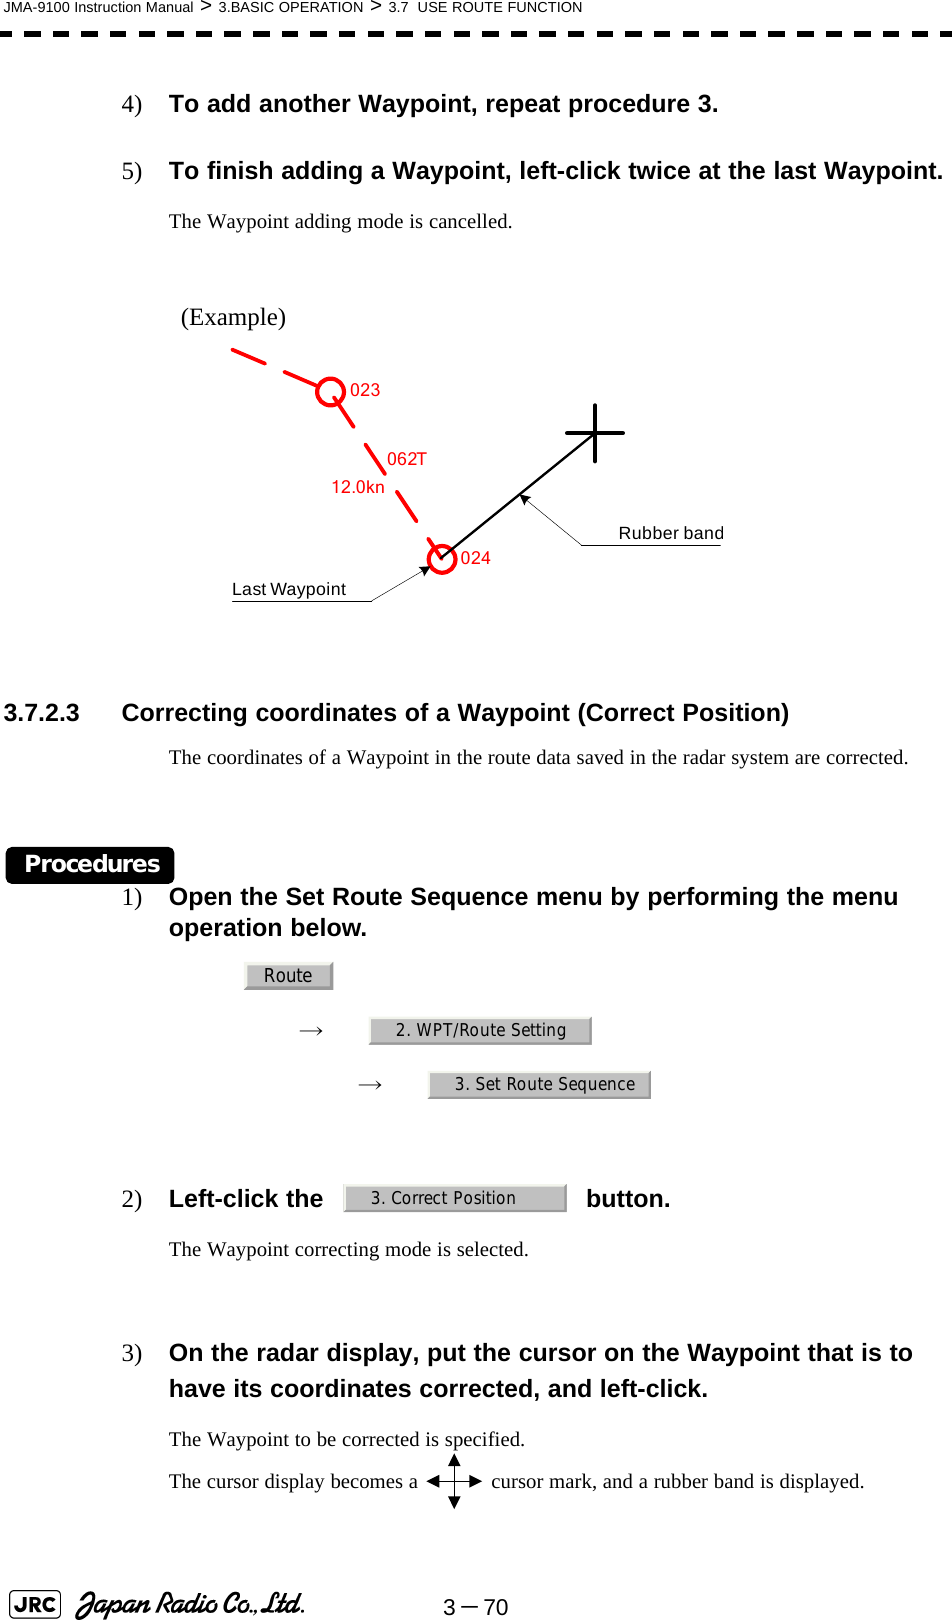 3－70JMA-9100 Instruction Manual &gt; 3.BASIC OPERATION &gt; 3.7  USE ROUTE FUNCTION4) To add another Waypoint, repeat procedure 3.5) To finish adding a Waypoint, left-click twice at the last Waypoint.The Waypoint adding mode is cancelled.(Example) 3.7.2.3 Correcting coordinates of a Waypoint (Correct Position)The coordinates of a Waypoint in the route data saved in the radar system are corrected.Procedures1) Open the Set Route Sequence menu by performing the menu operation below.→　→　2) Left-click the button.The Waypoint correcting mode is selected.3) On the radar display, put the cursor on the Waypoint that is to have its coordinates corrected, and left-click.The Waypoint to be corrected is specified.The cursor display becomes a   cursor mark, and a rubber band is displayed.062T12.0knLast WaypointRubber band023024Route2. WPT/Route Setting3. Set Route Sequence3. Correct Position